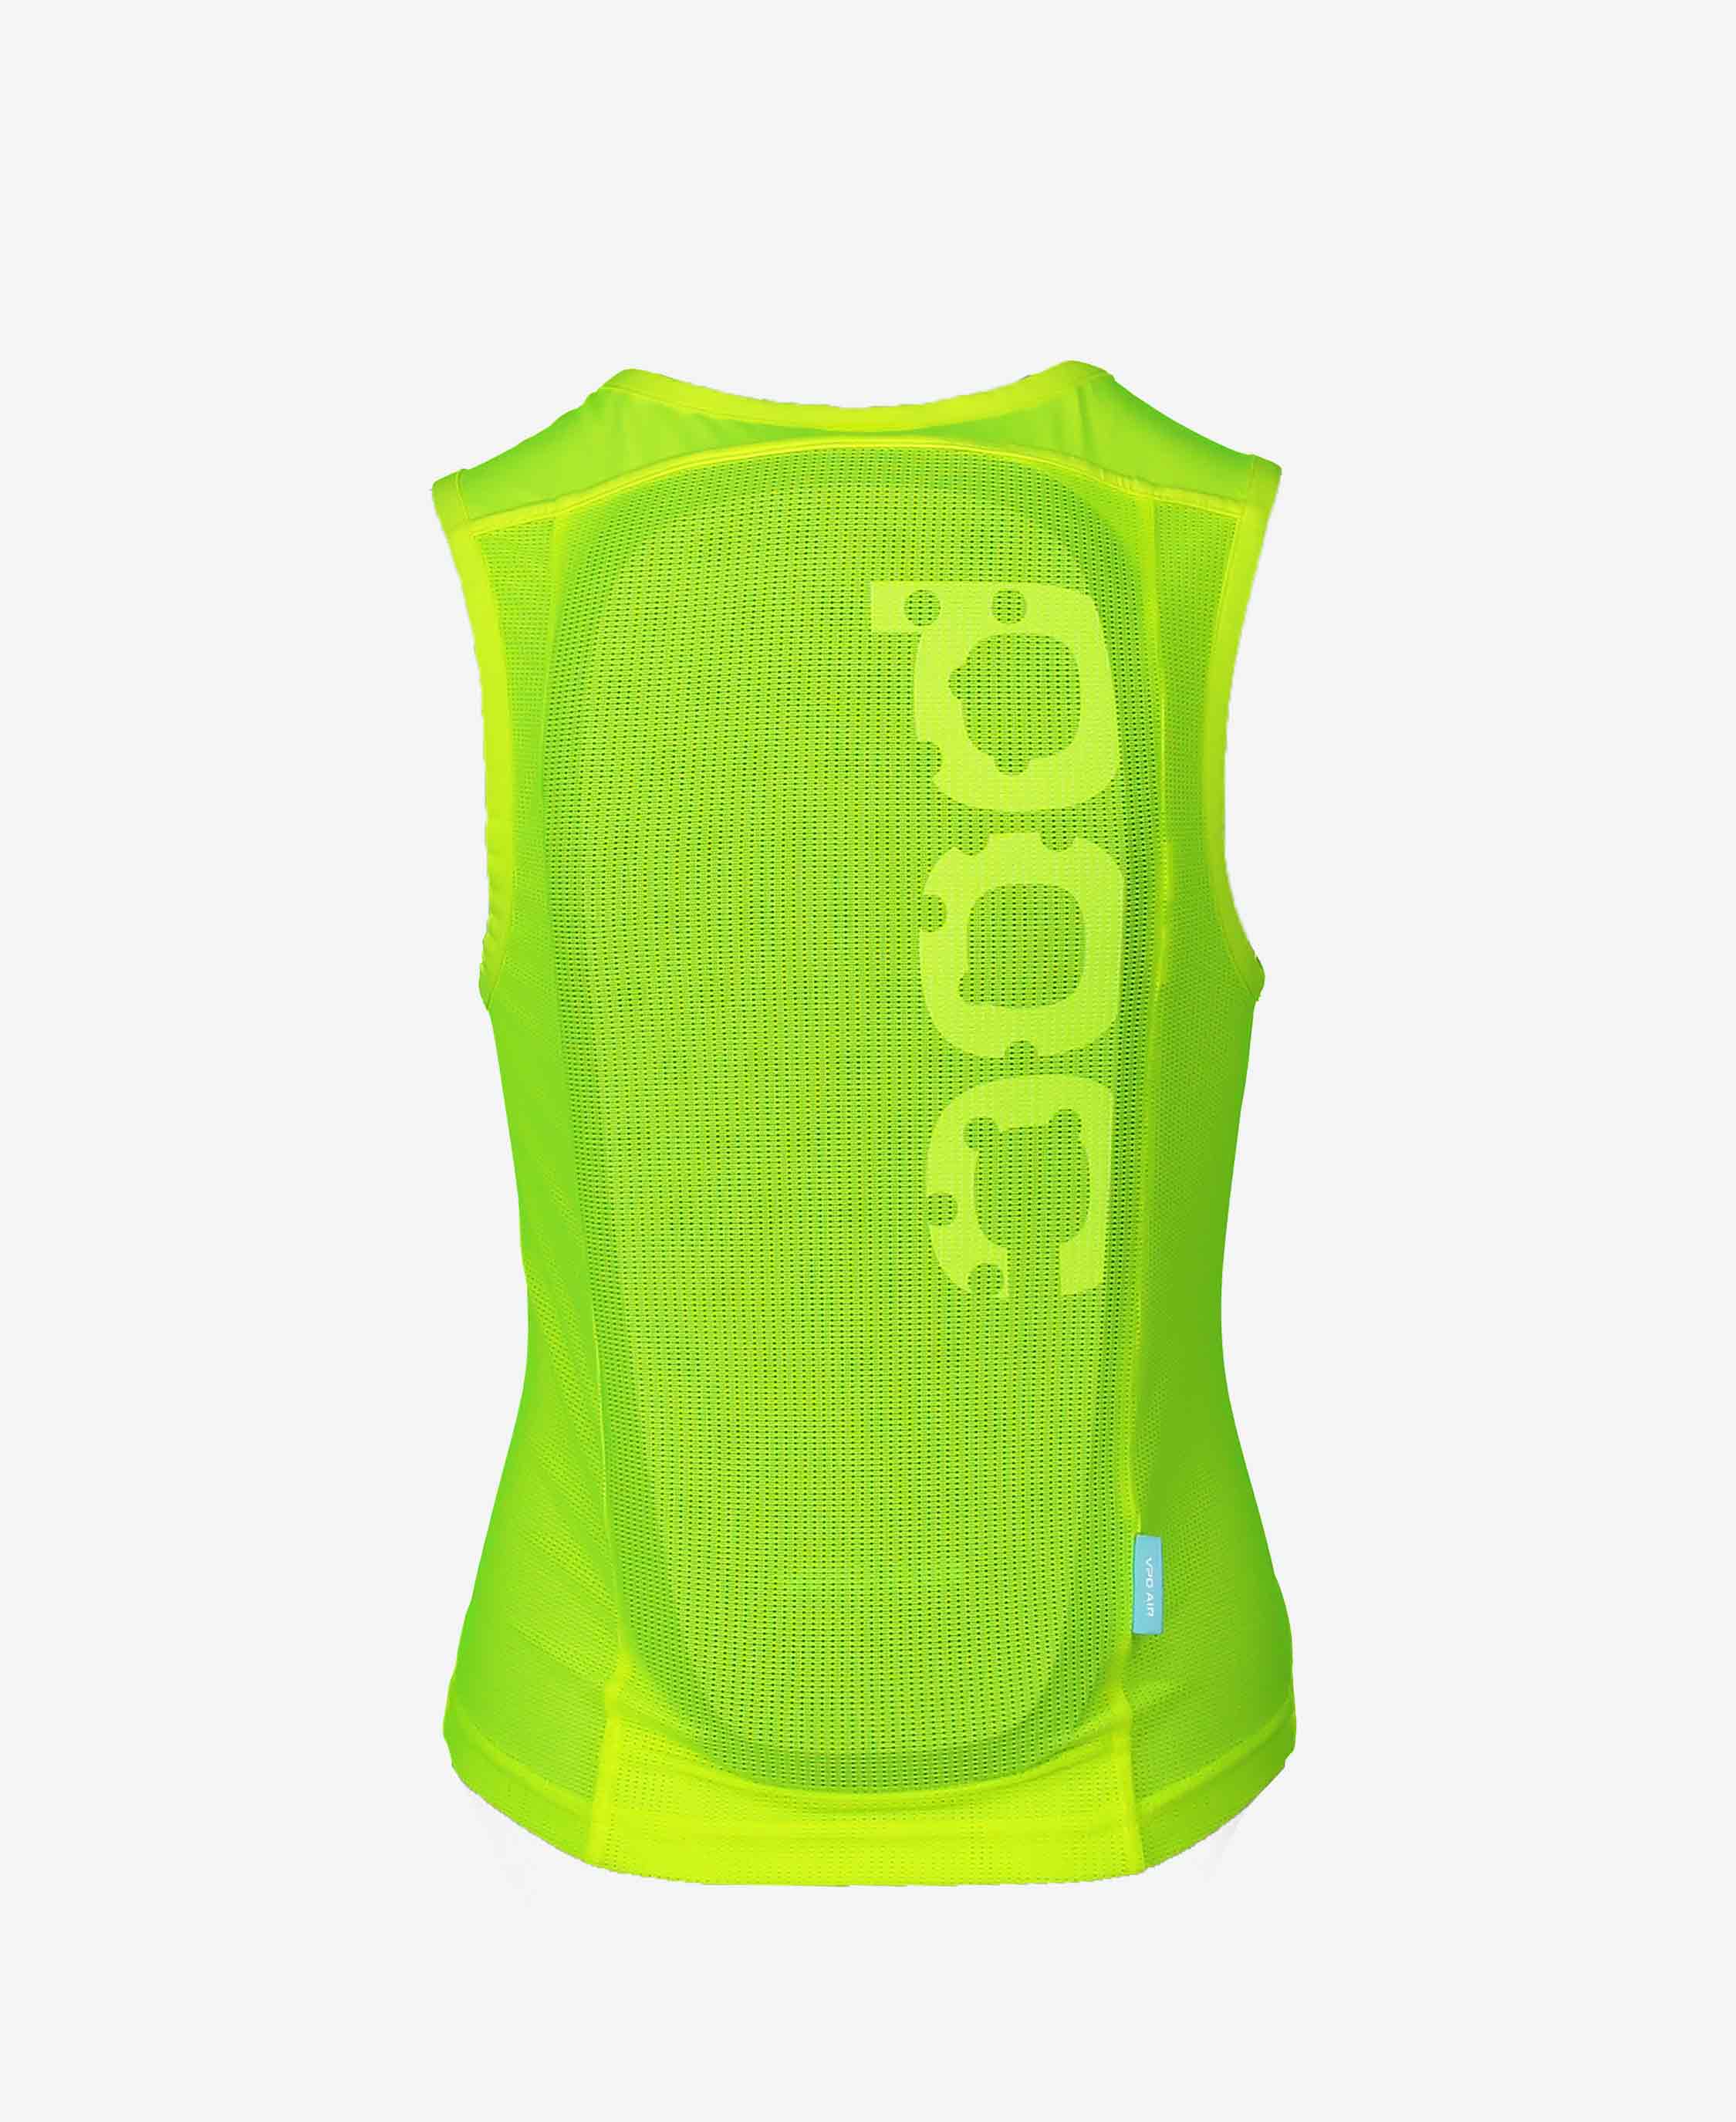 POCito VPD Air Vest - Mountain Kids Outfitters: Fluorescent Yellow Green, Back View